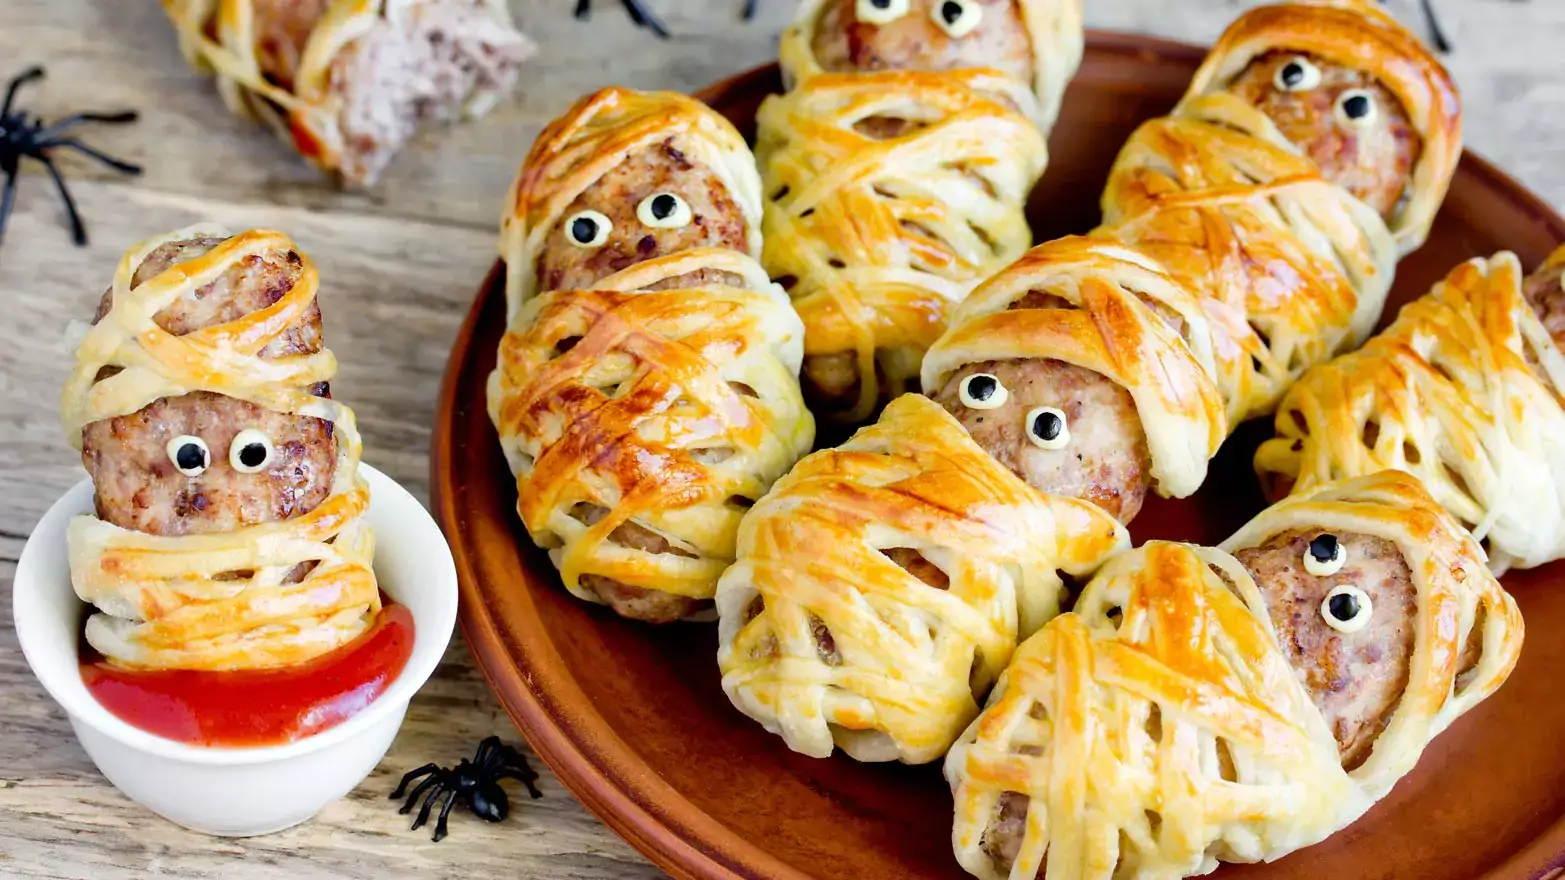 Sausages wrapped in pastry dough with edible eyeballs